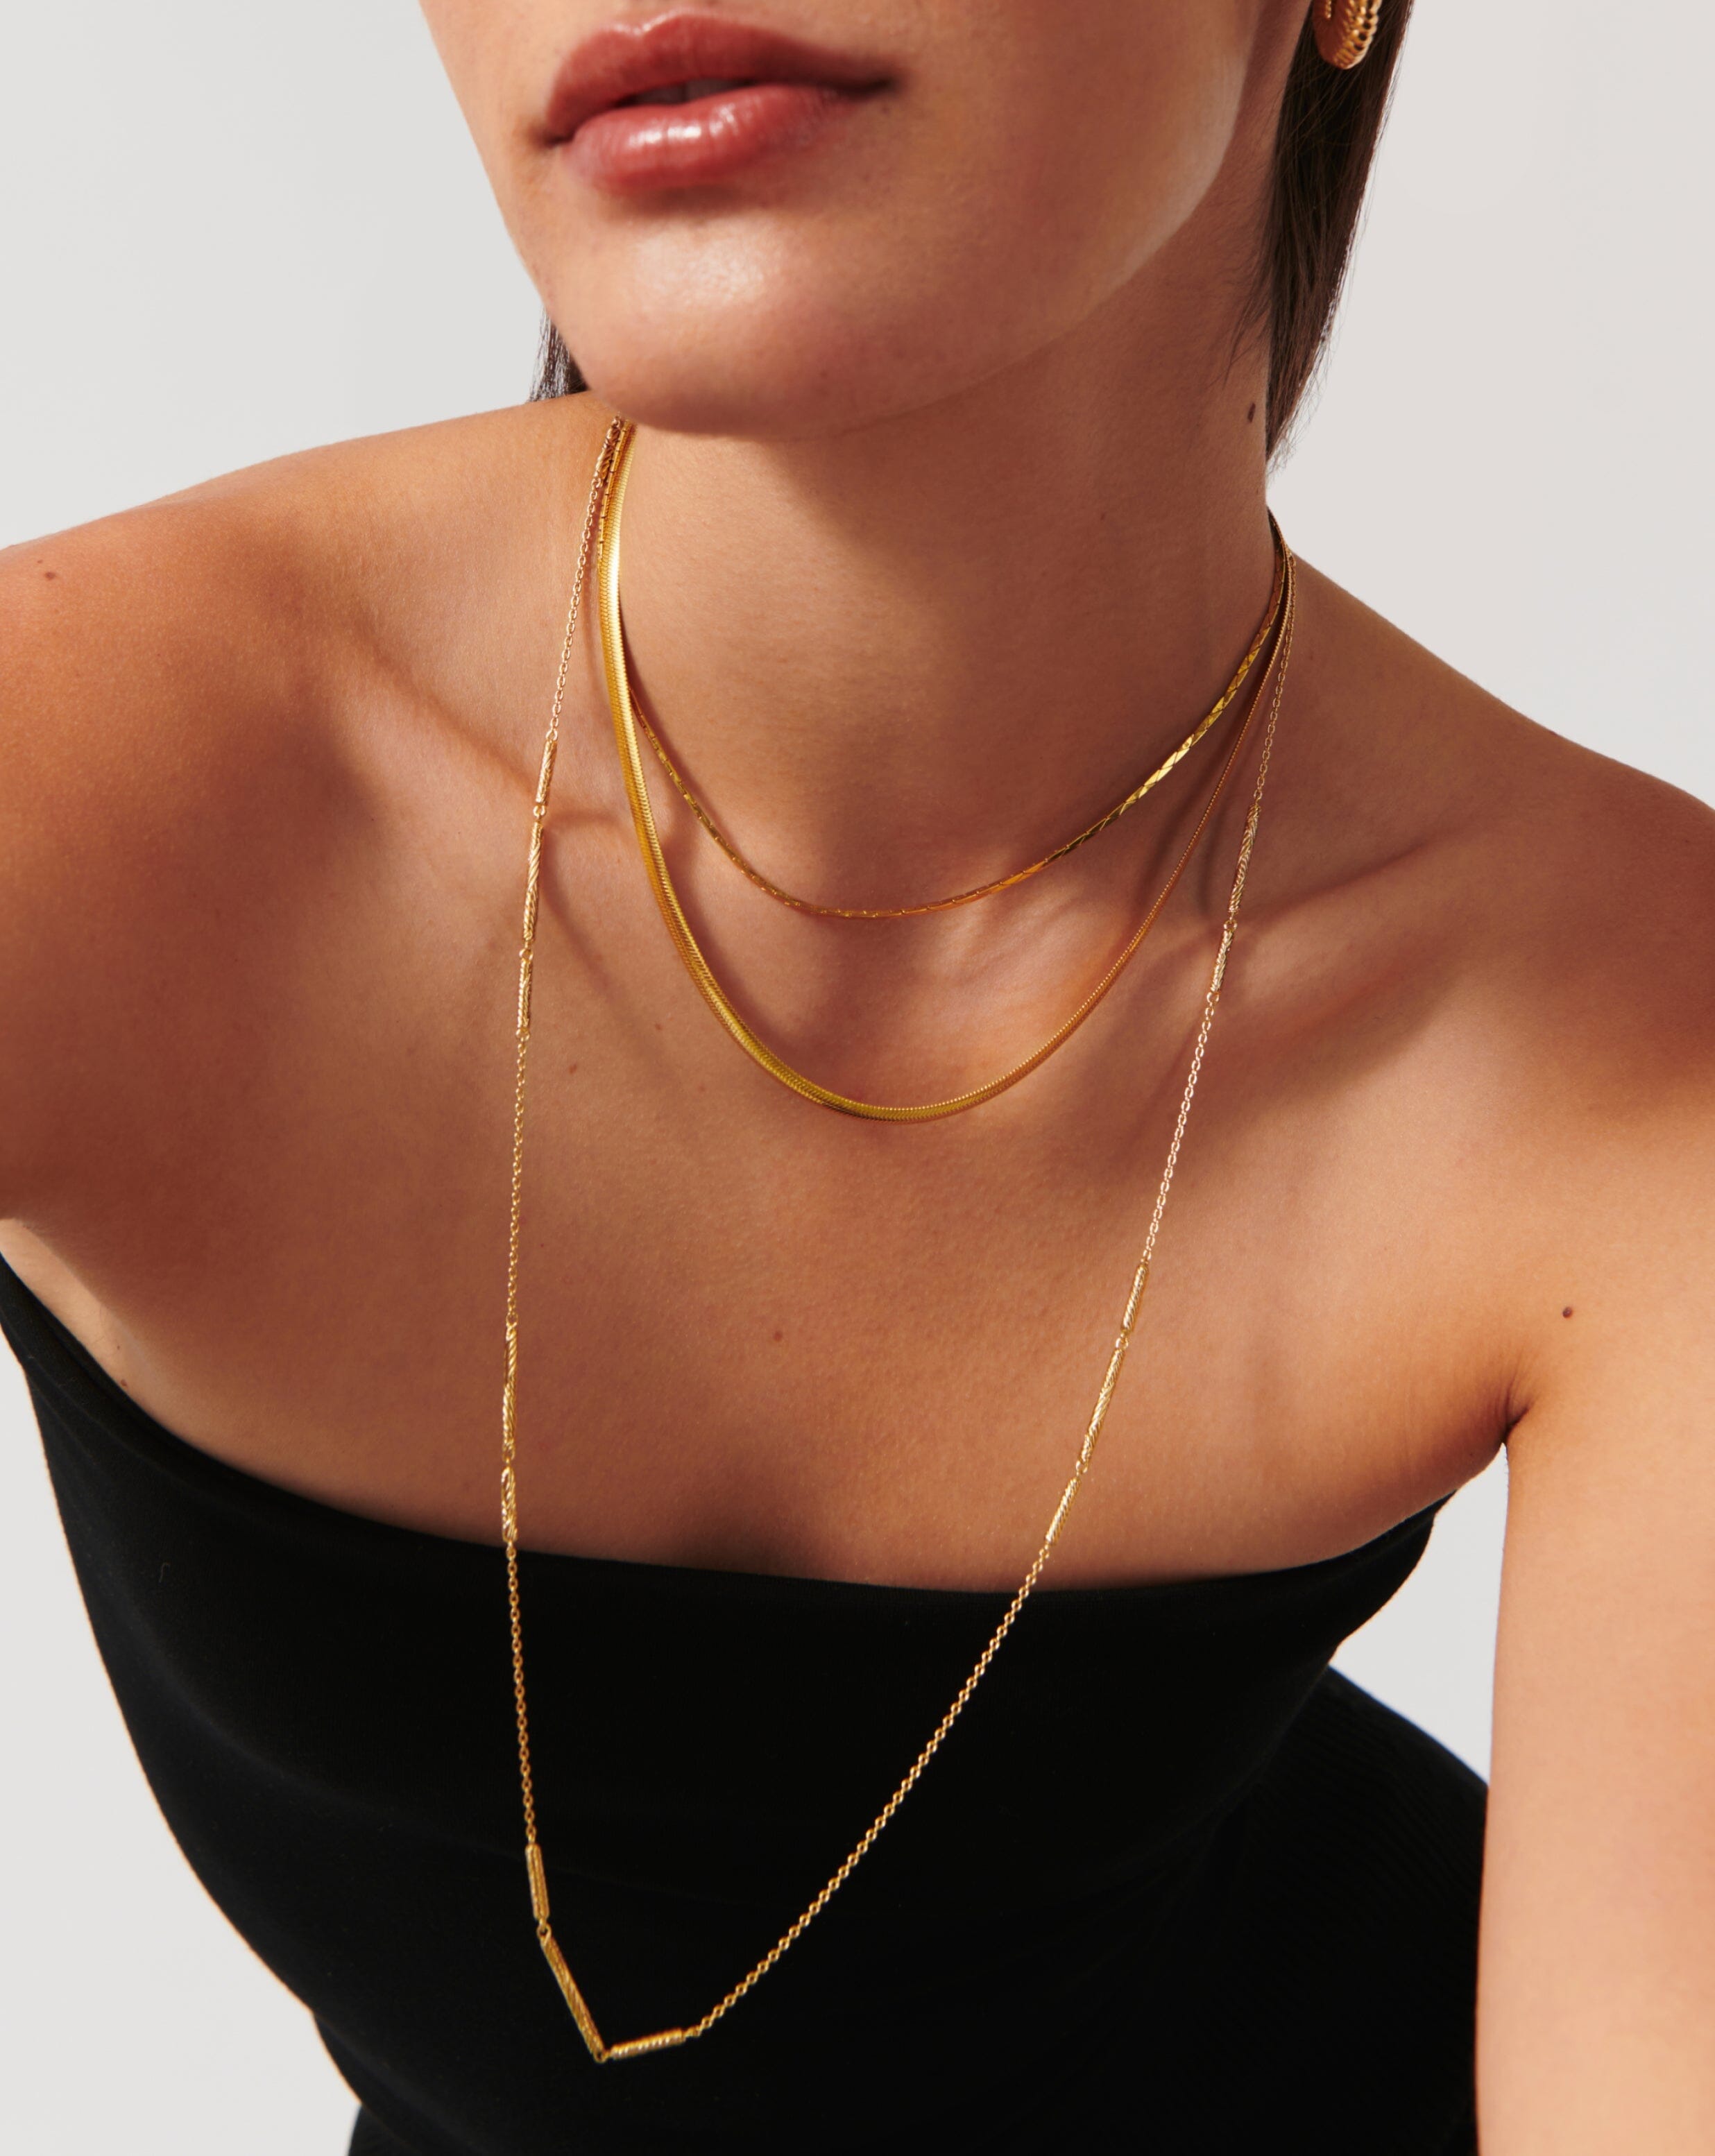 Mariner Long Chain Necklace, 18ct Gold Plated Necklaces